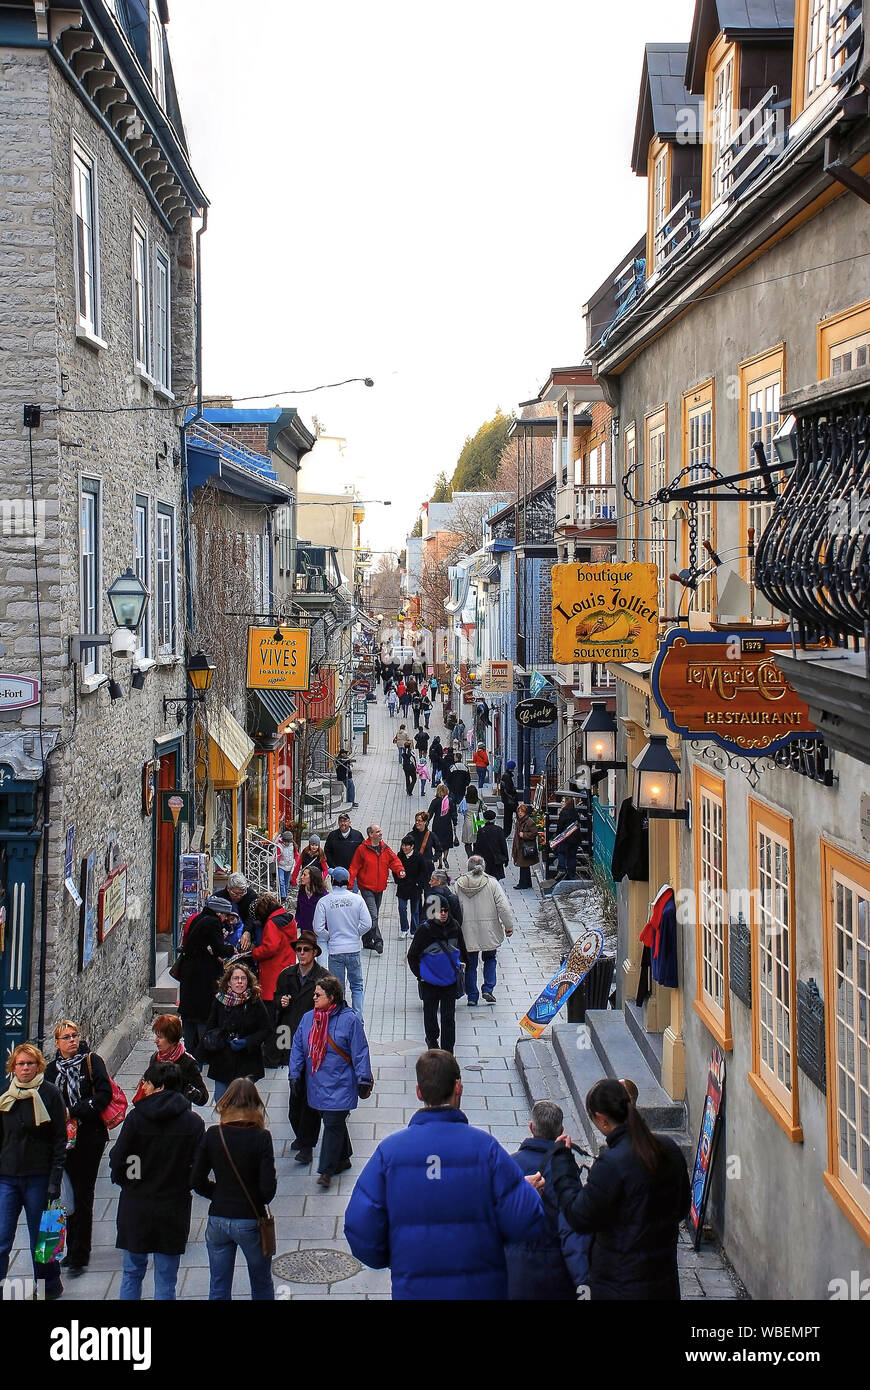 Quebec City, Canada - April, 10, 2009: A crowd of people on the busy Quartier du Petit Champlain in old Quebec City.  It is claimed to be the oldest c Stock Photo